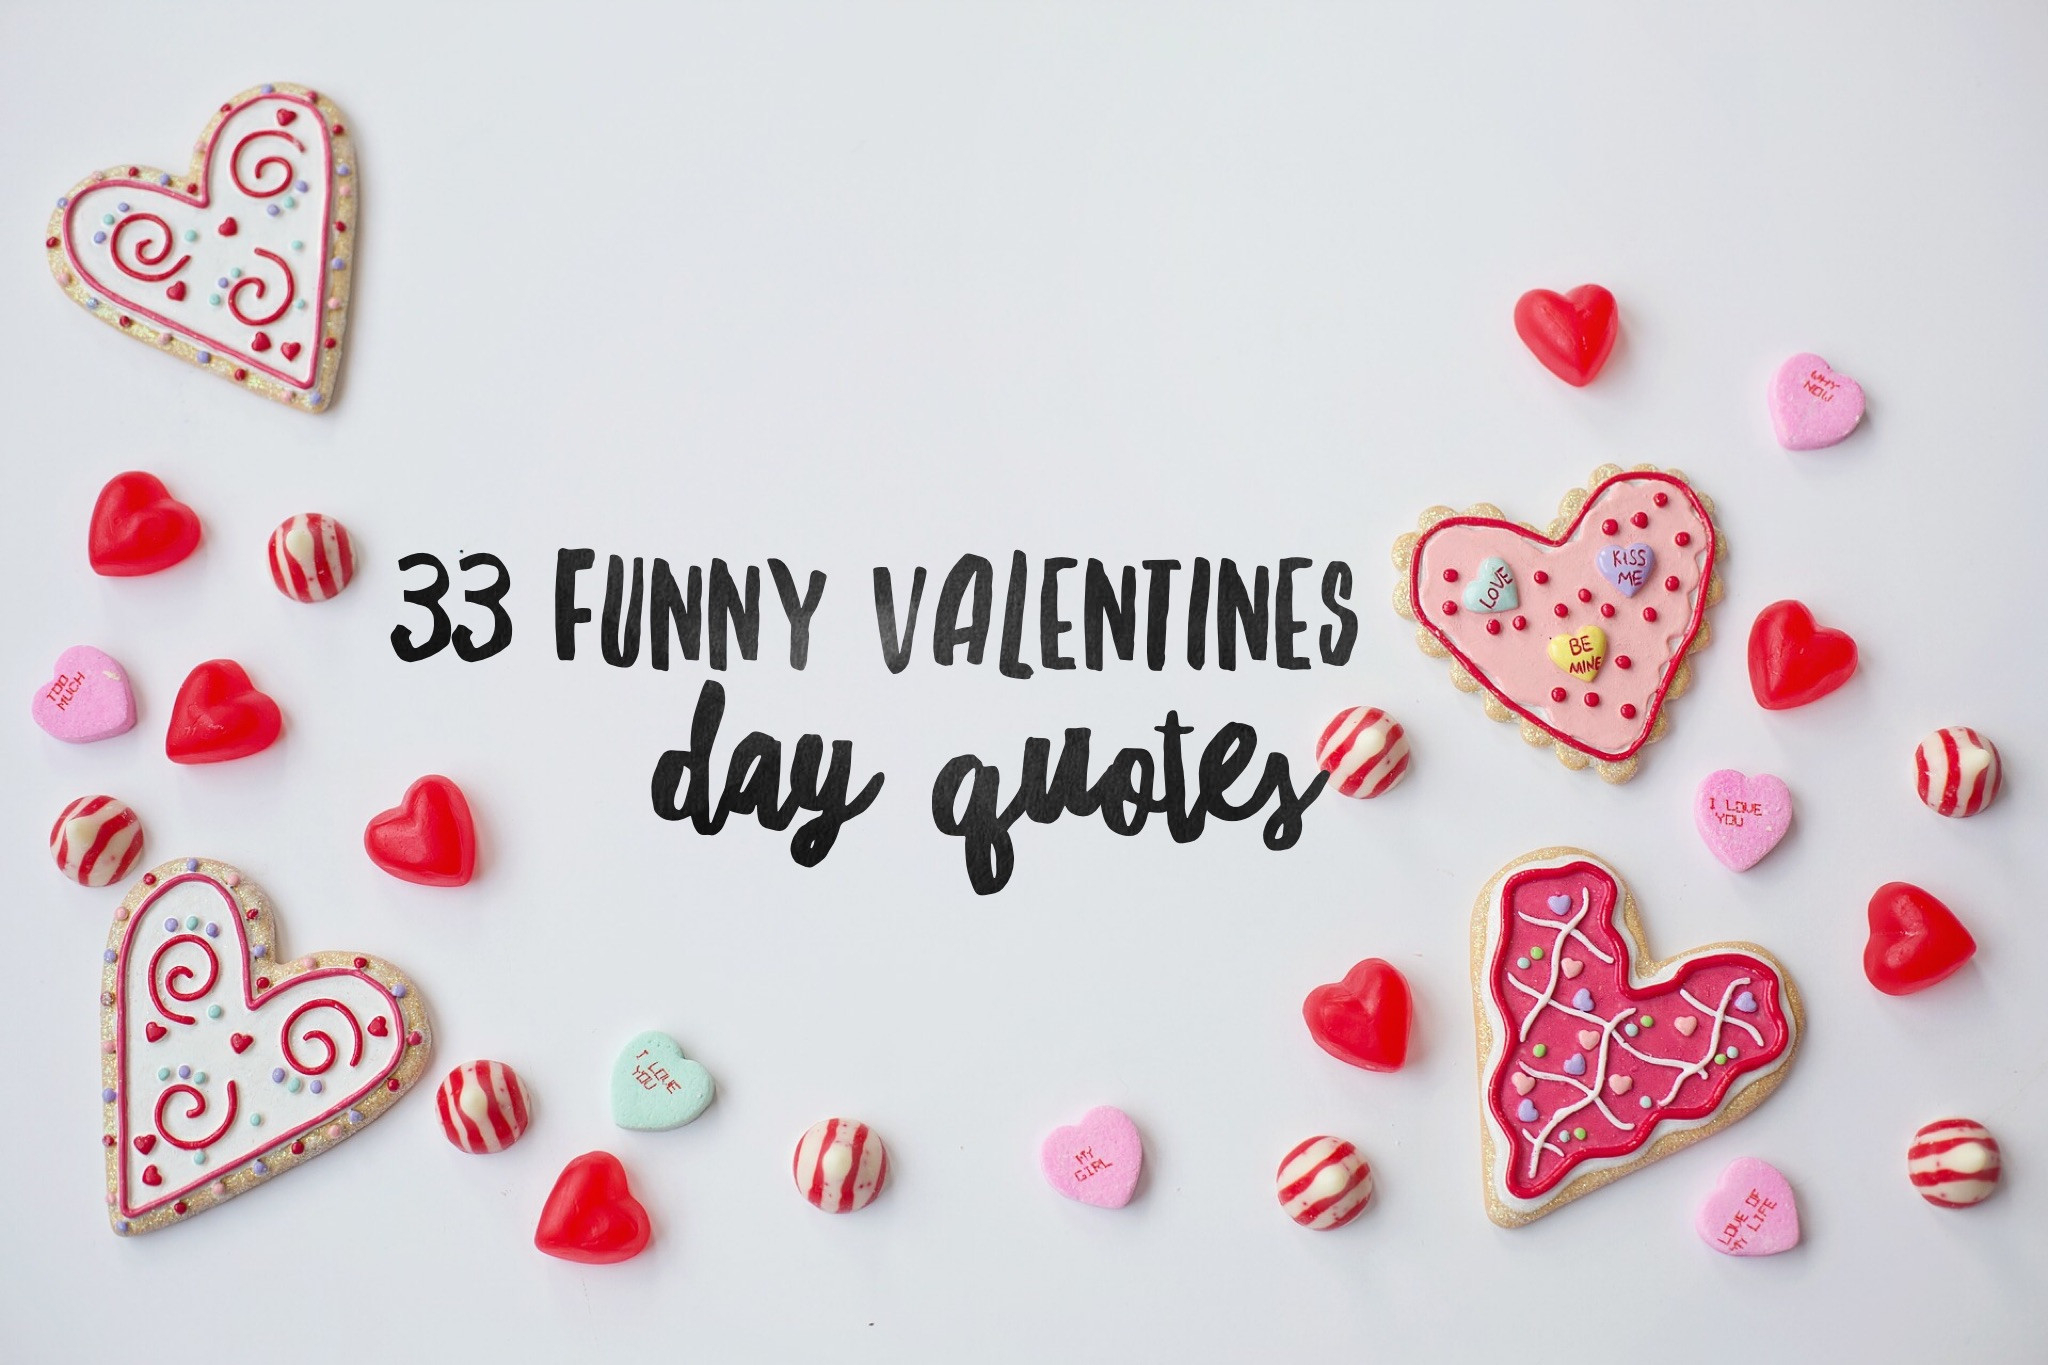 Valentines Day Quote Funny
 33 Funny Valentines Day Quotes